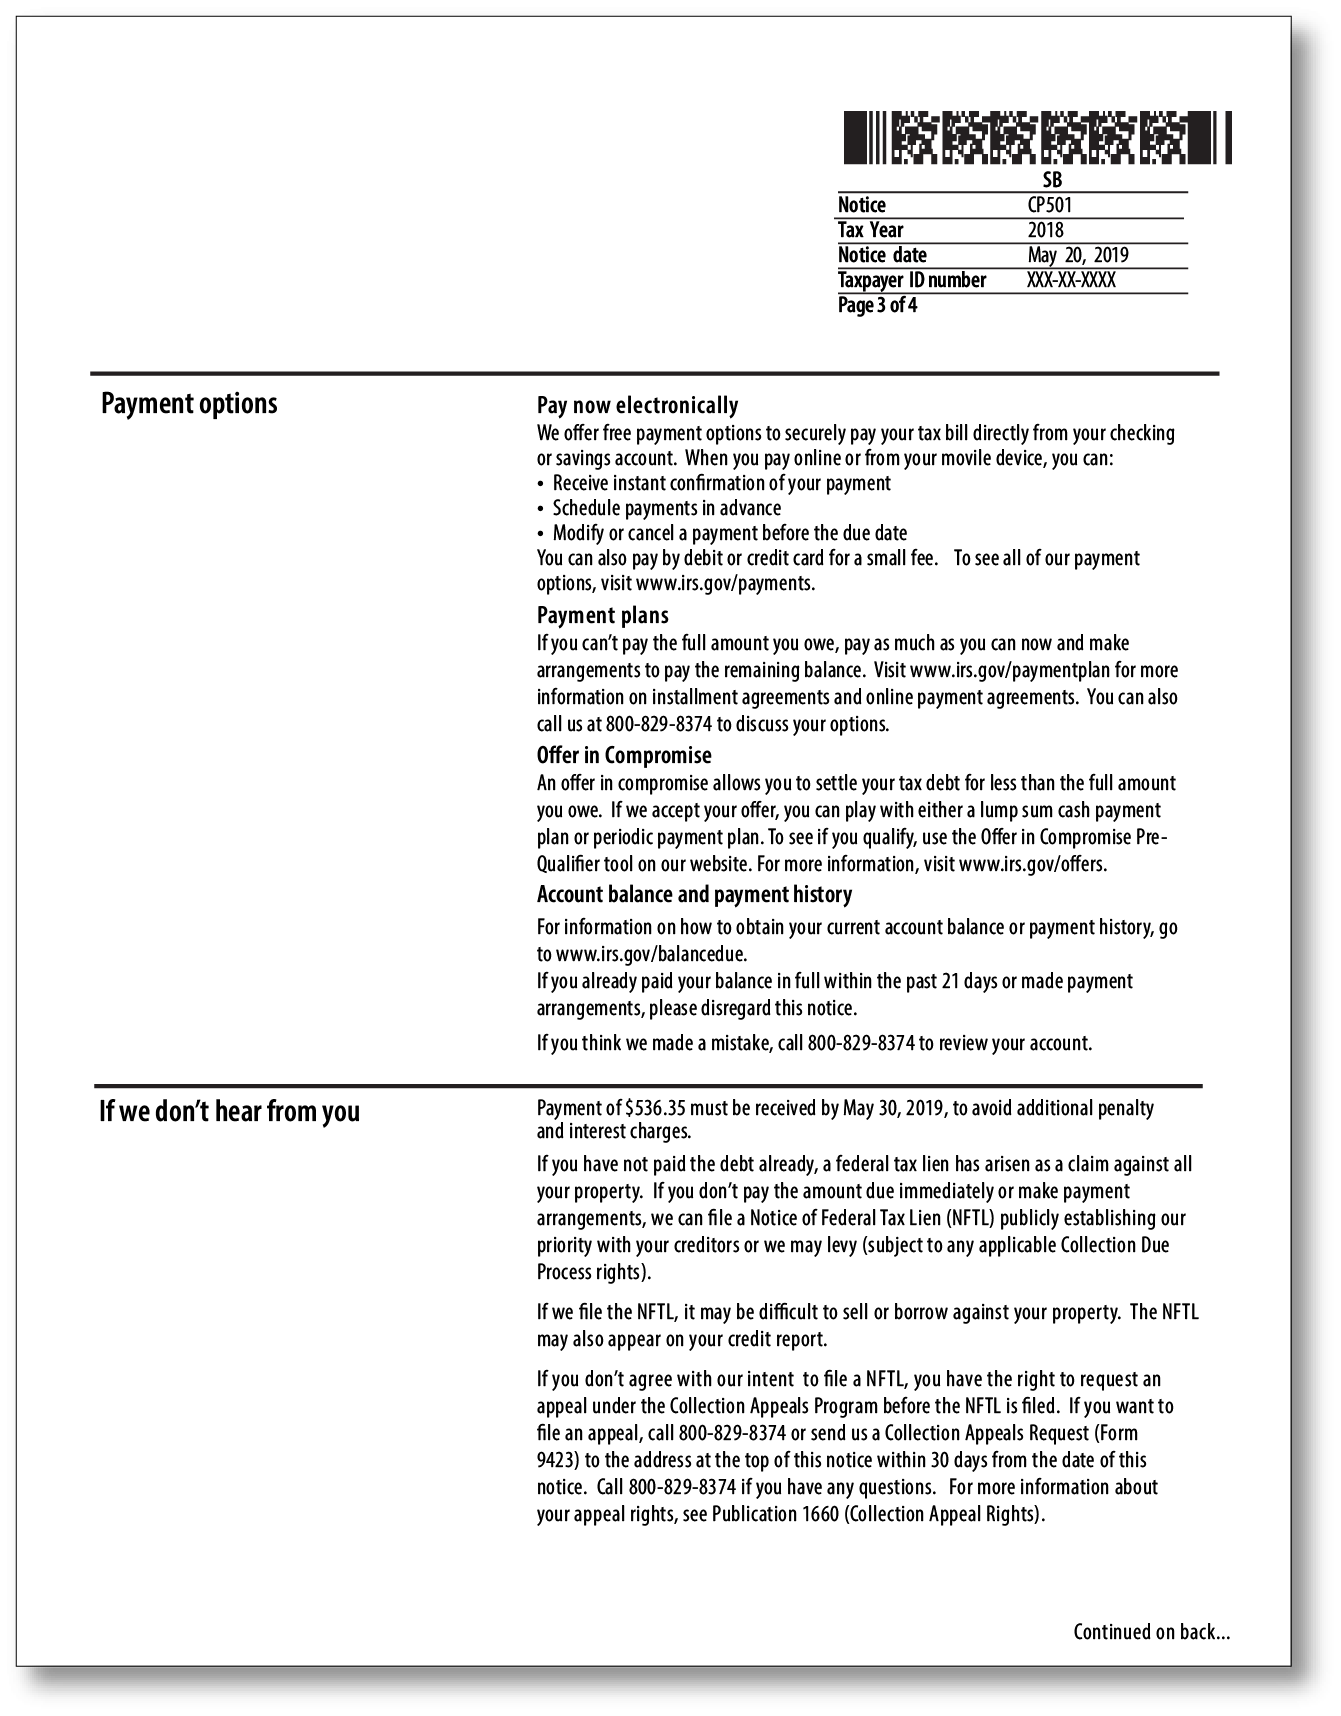 IRS Audit Letter CP501 – Sample 1